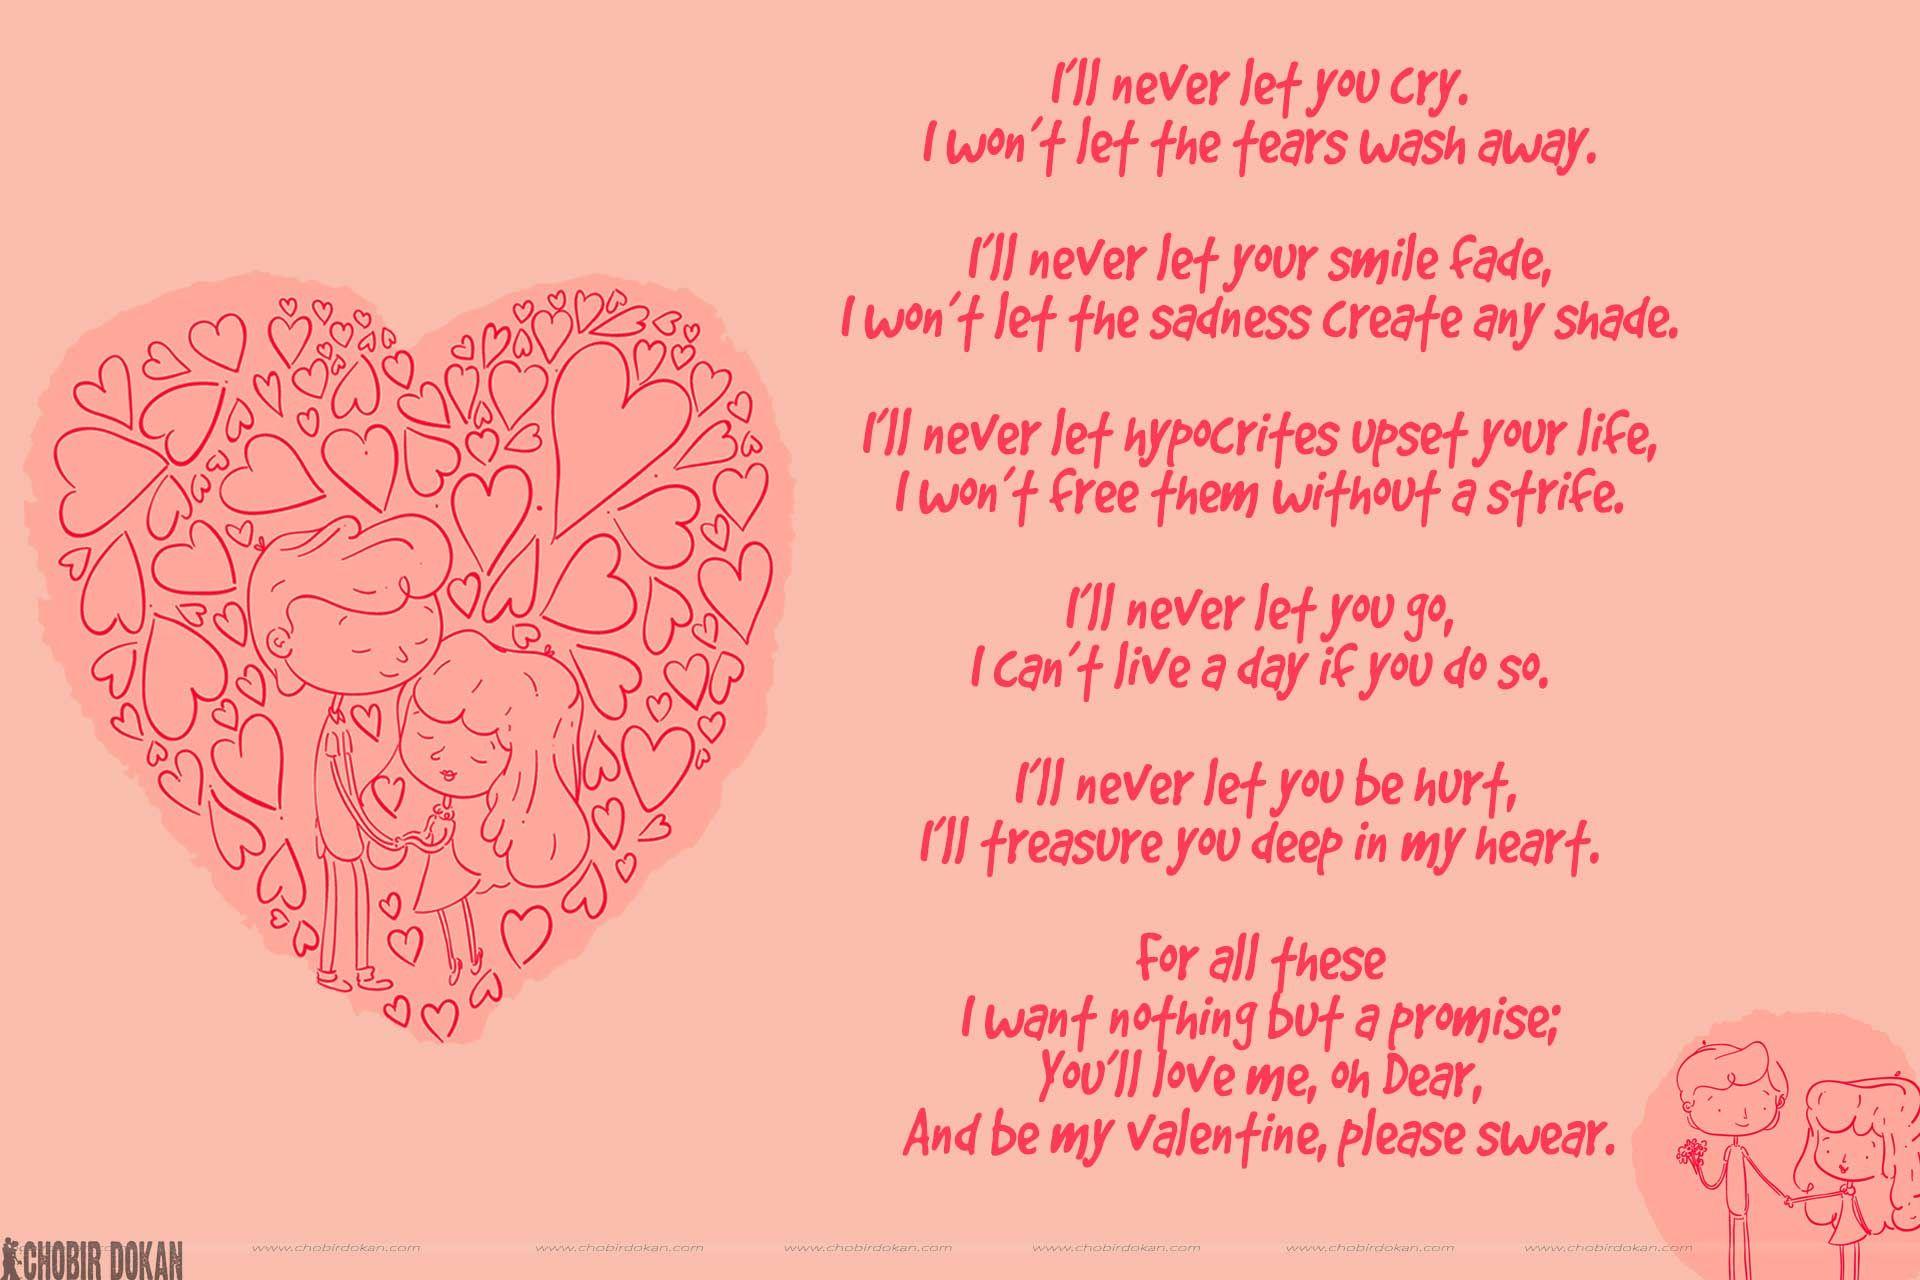 Will You Be My Valentine Poems For Him Her With Image. Valentines Poems, Valentine Poems For Him, Poems